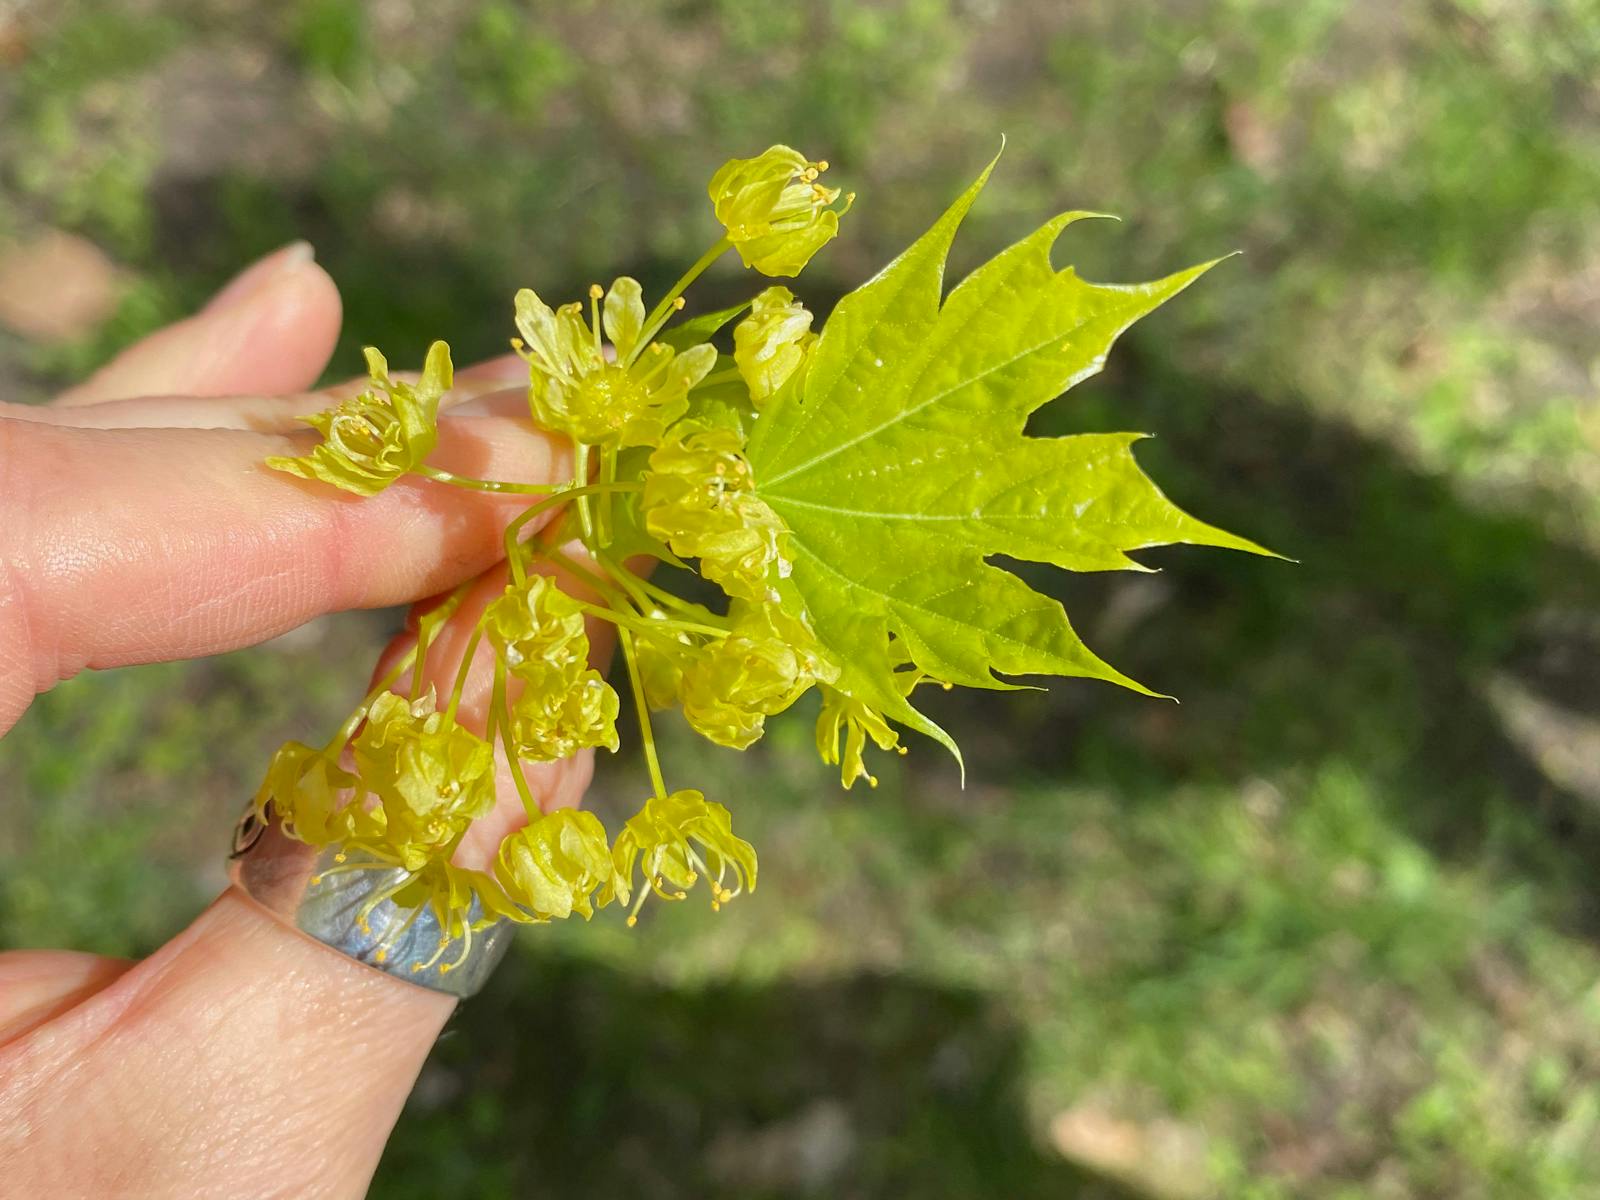 My hand holding a cluster of yellowish green maple flowers and a pale green leaf, before I popped them in my mouth.